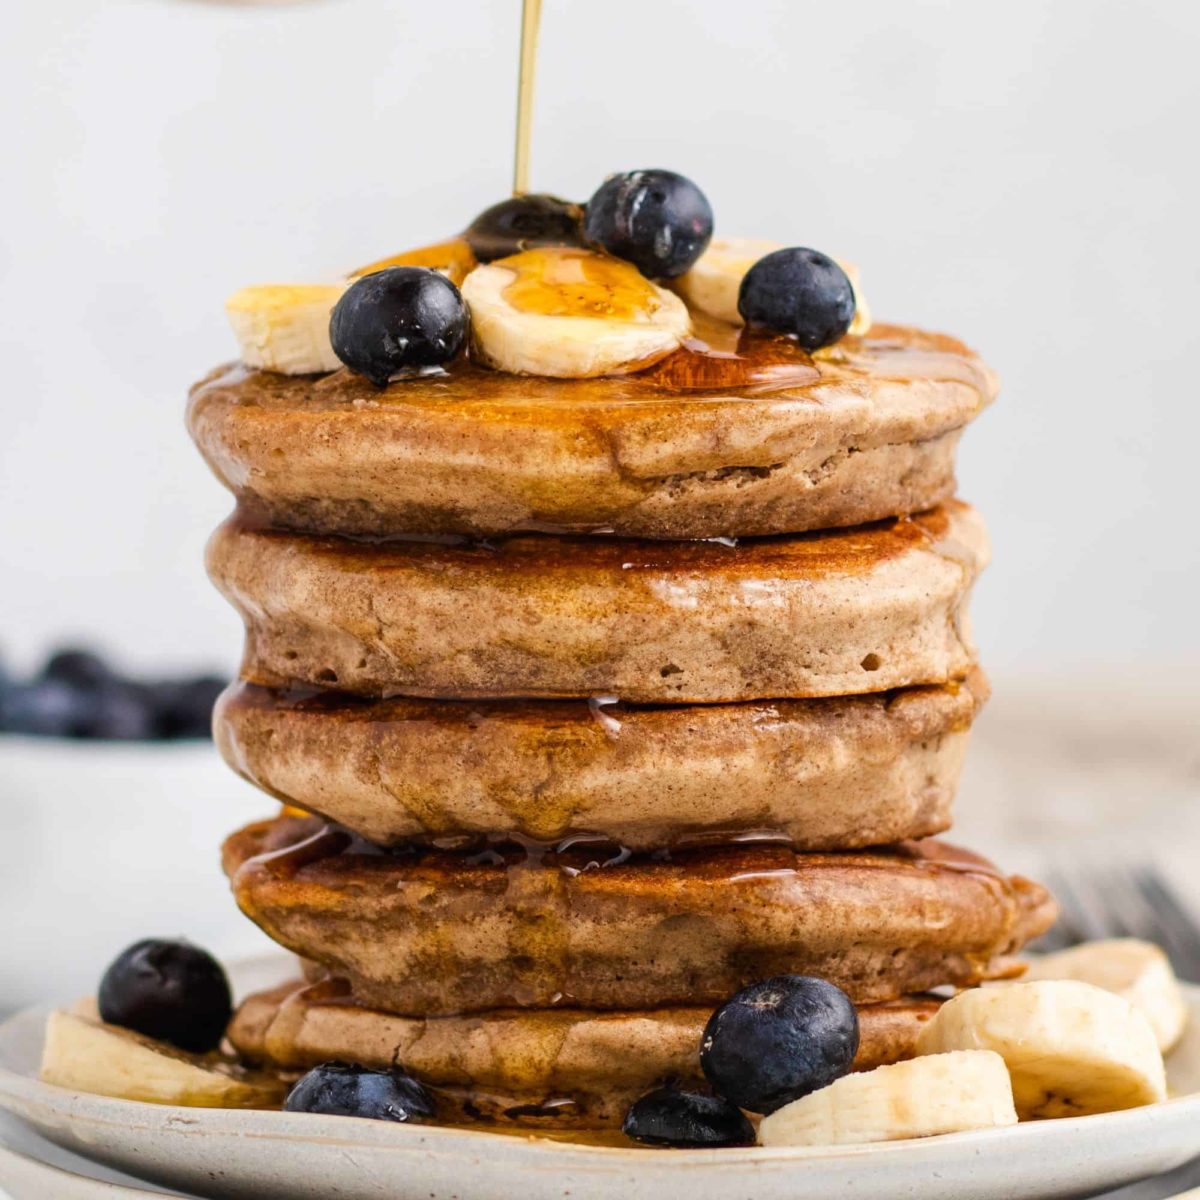 close-up front view of syrup pouring onto stack of pancakes with bananas and blueberries